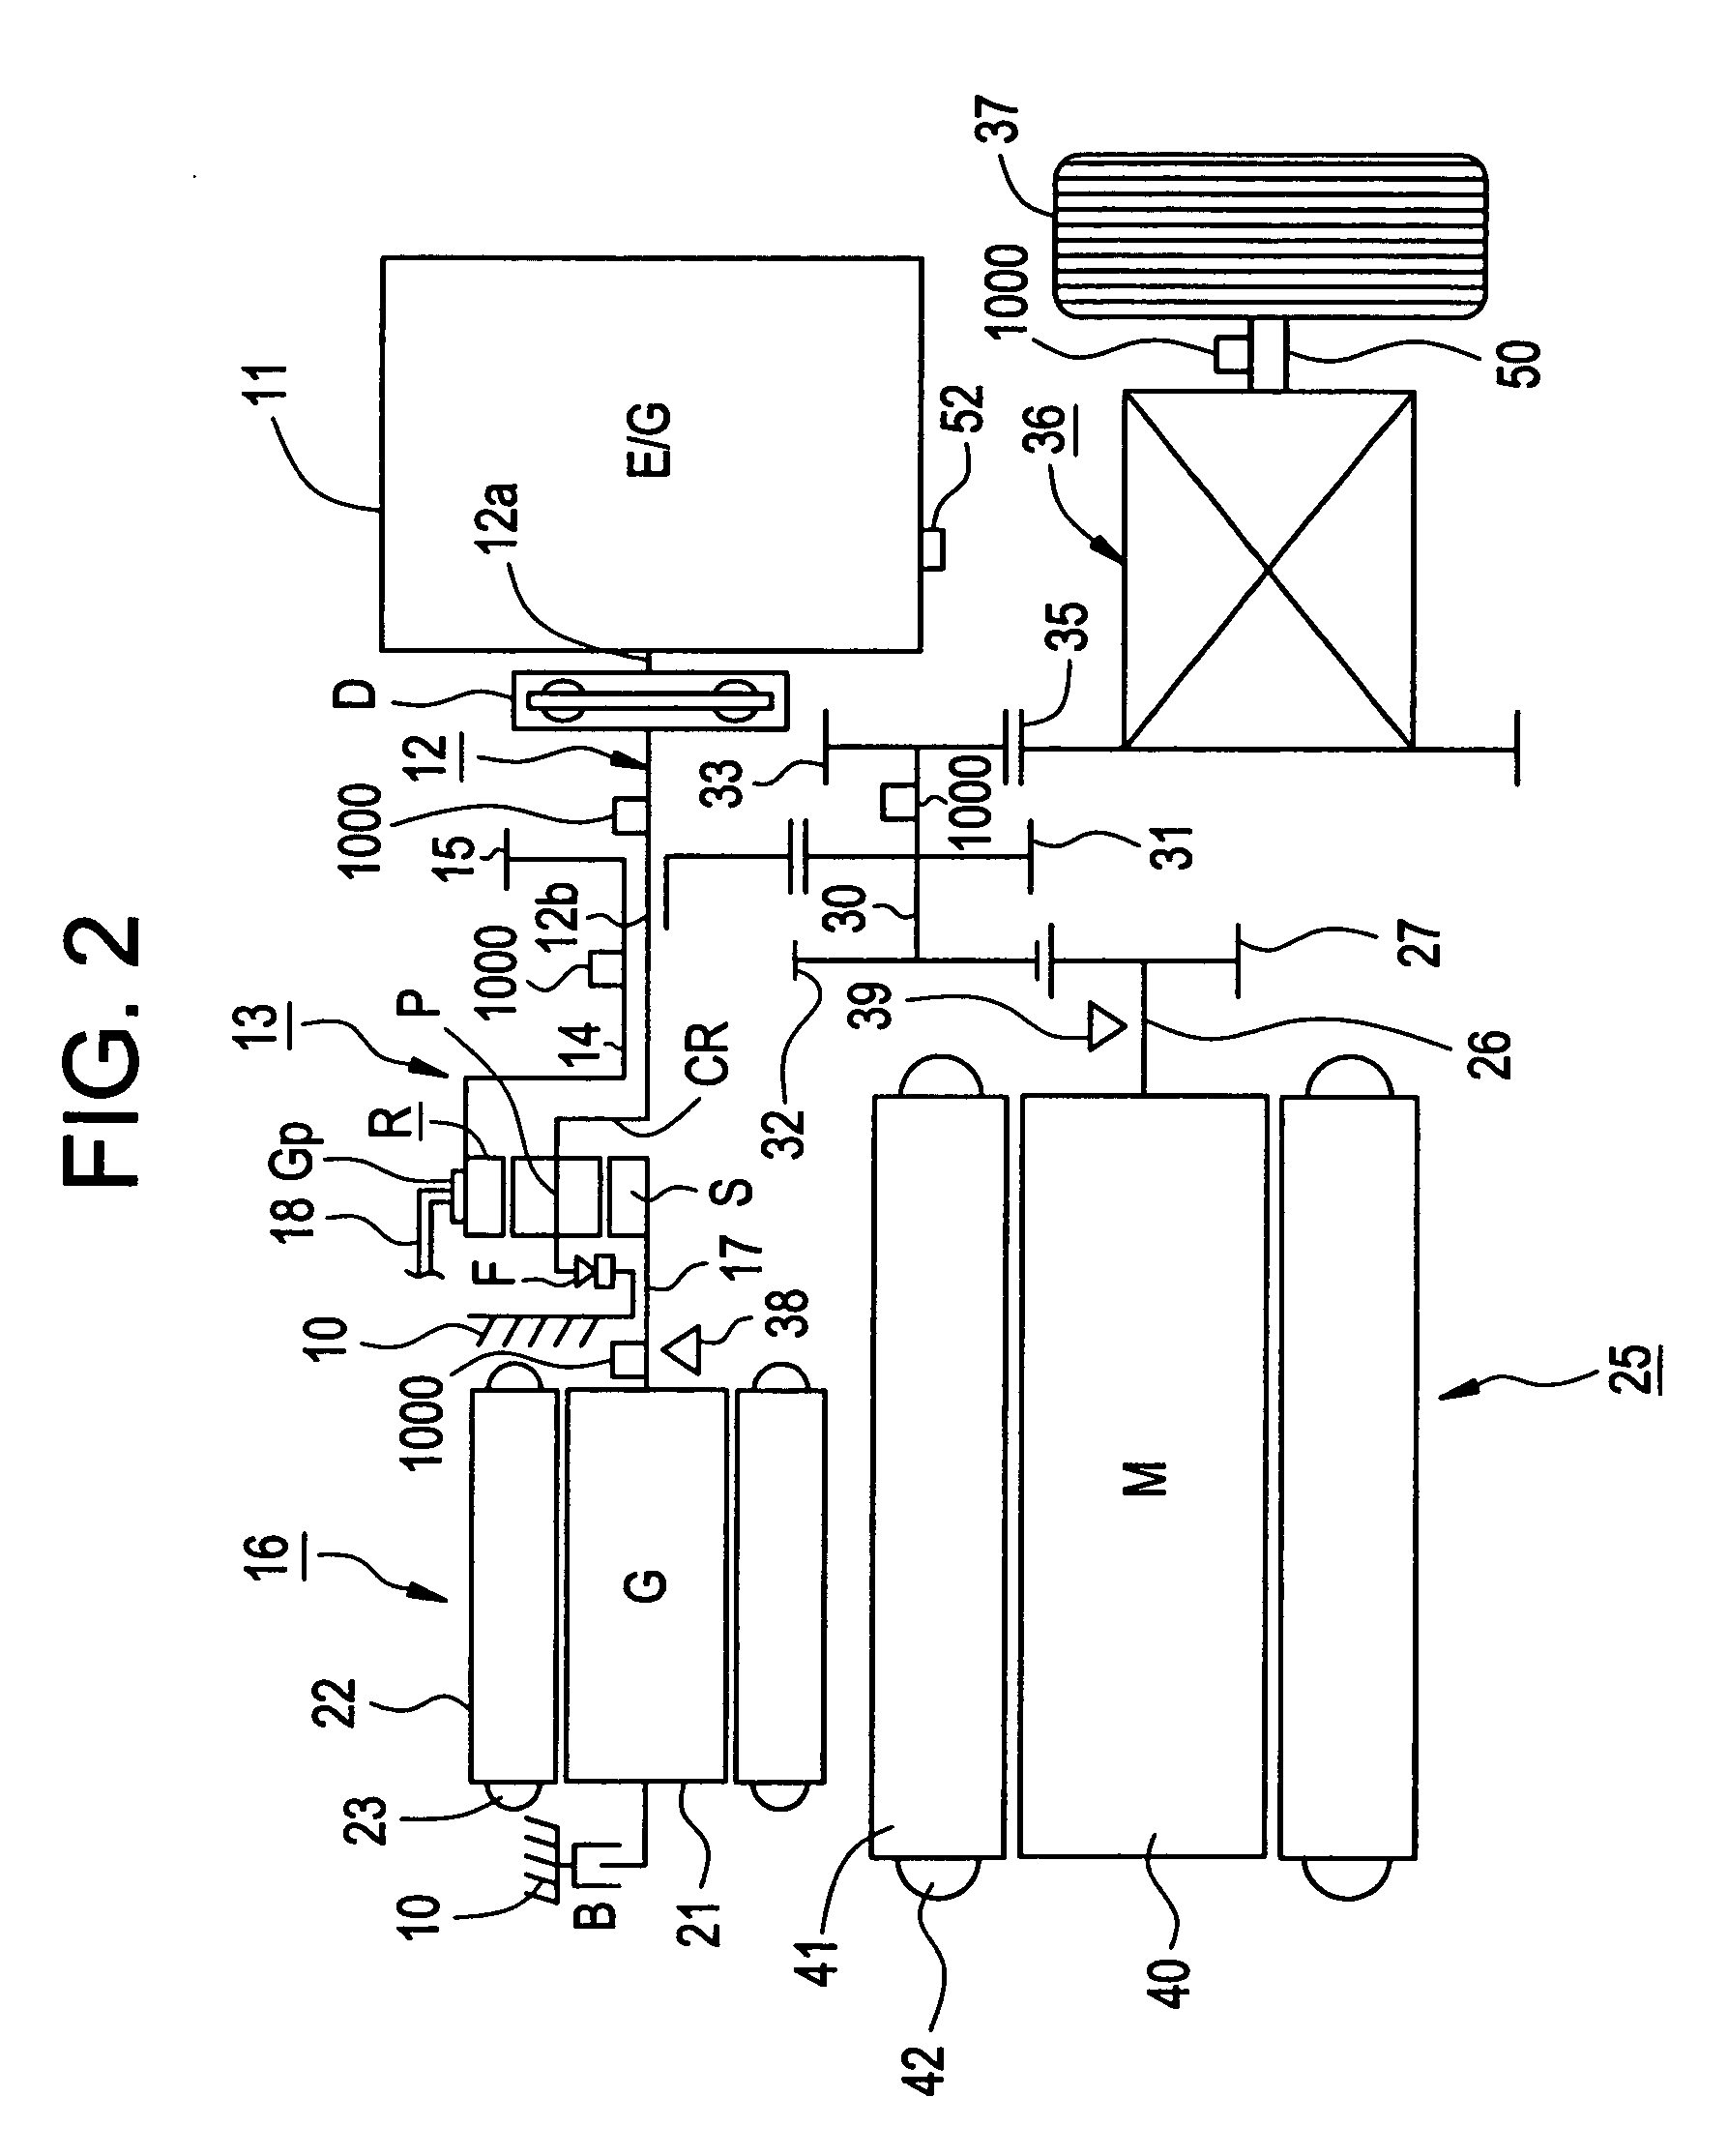 Drive control system for electric vehicle and method of drive control of electric vehicle